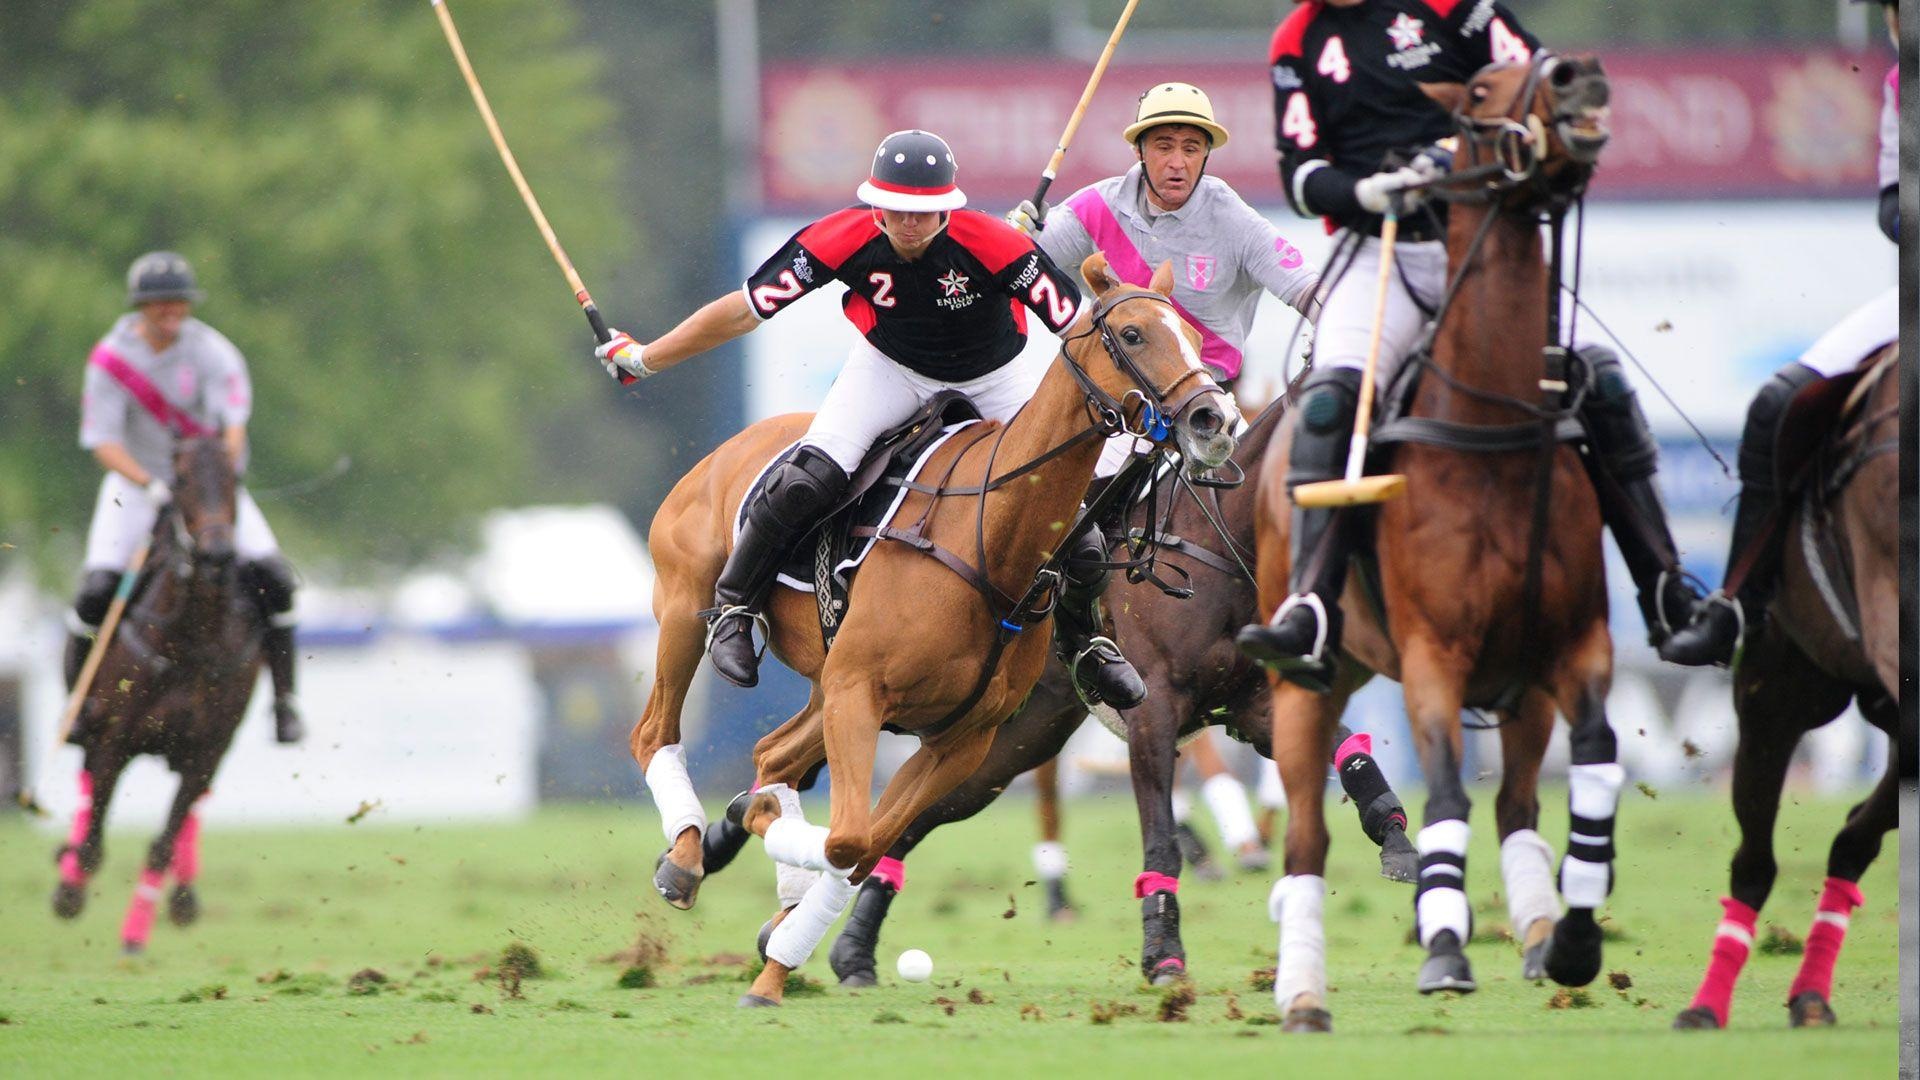 Horse Polo: A competitive equestrian sports discipline, A former official Olympic sport. 1920x1080 Full HD Background.